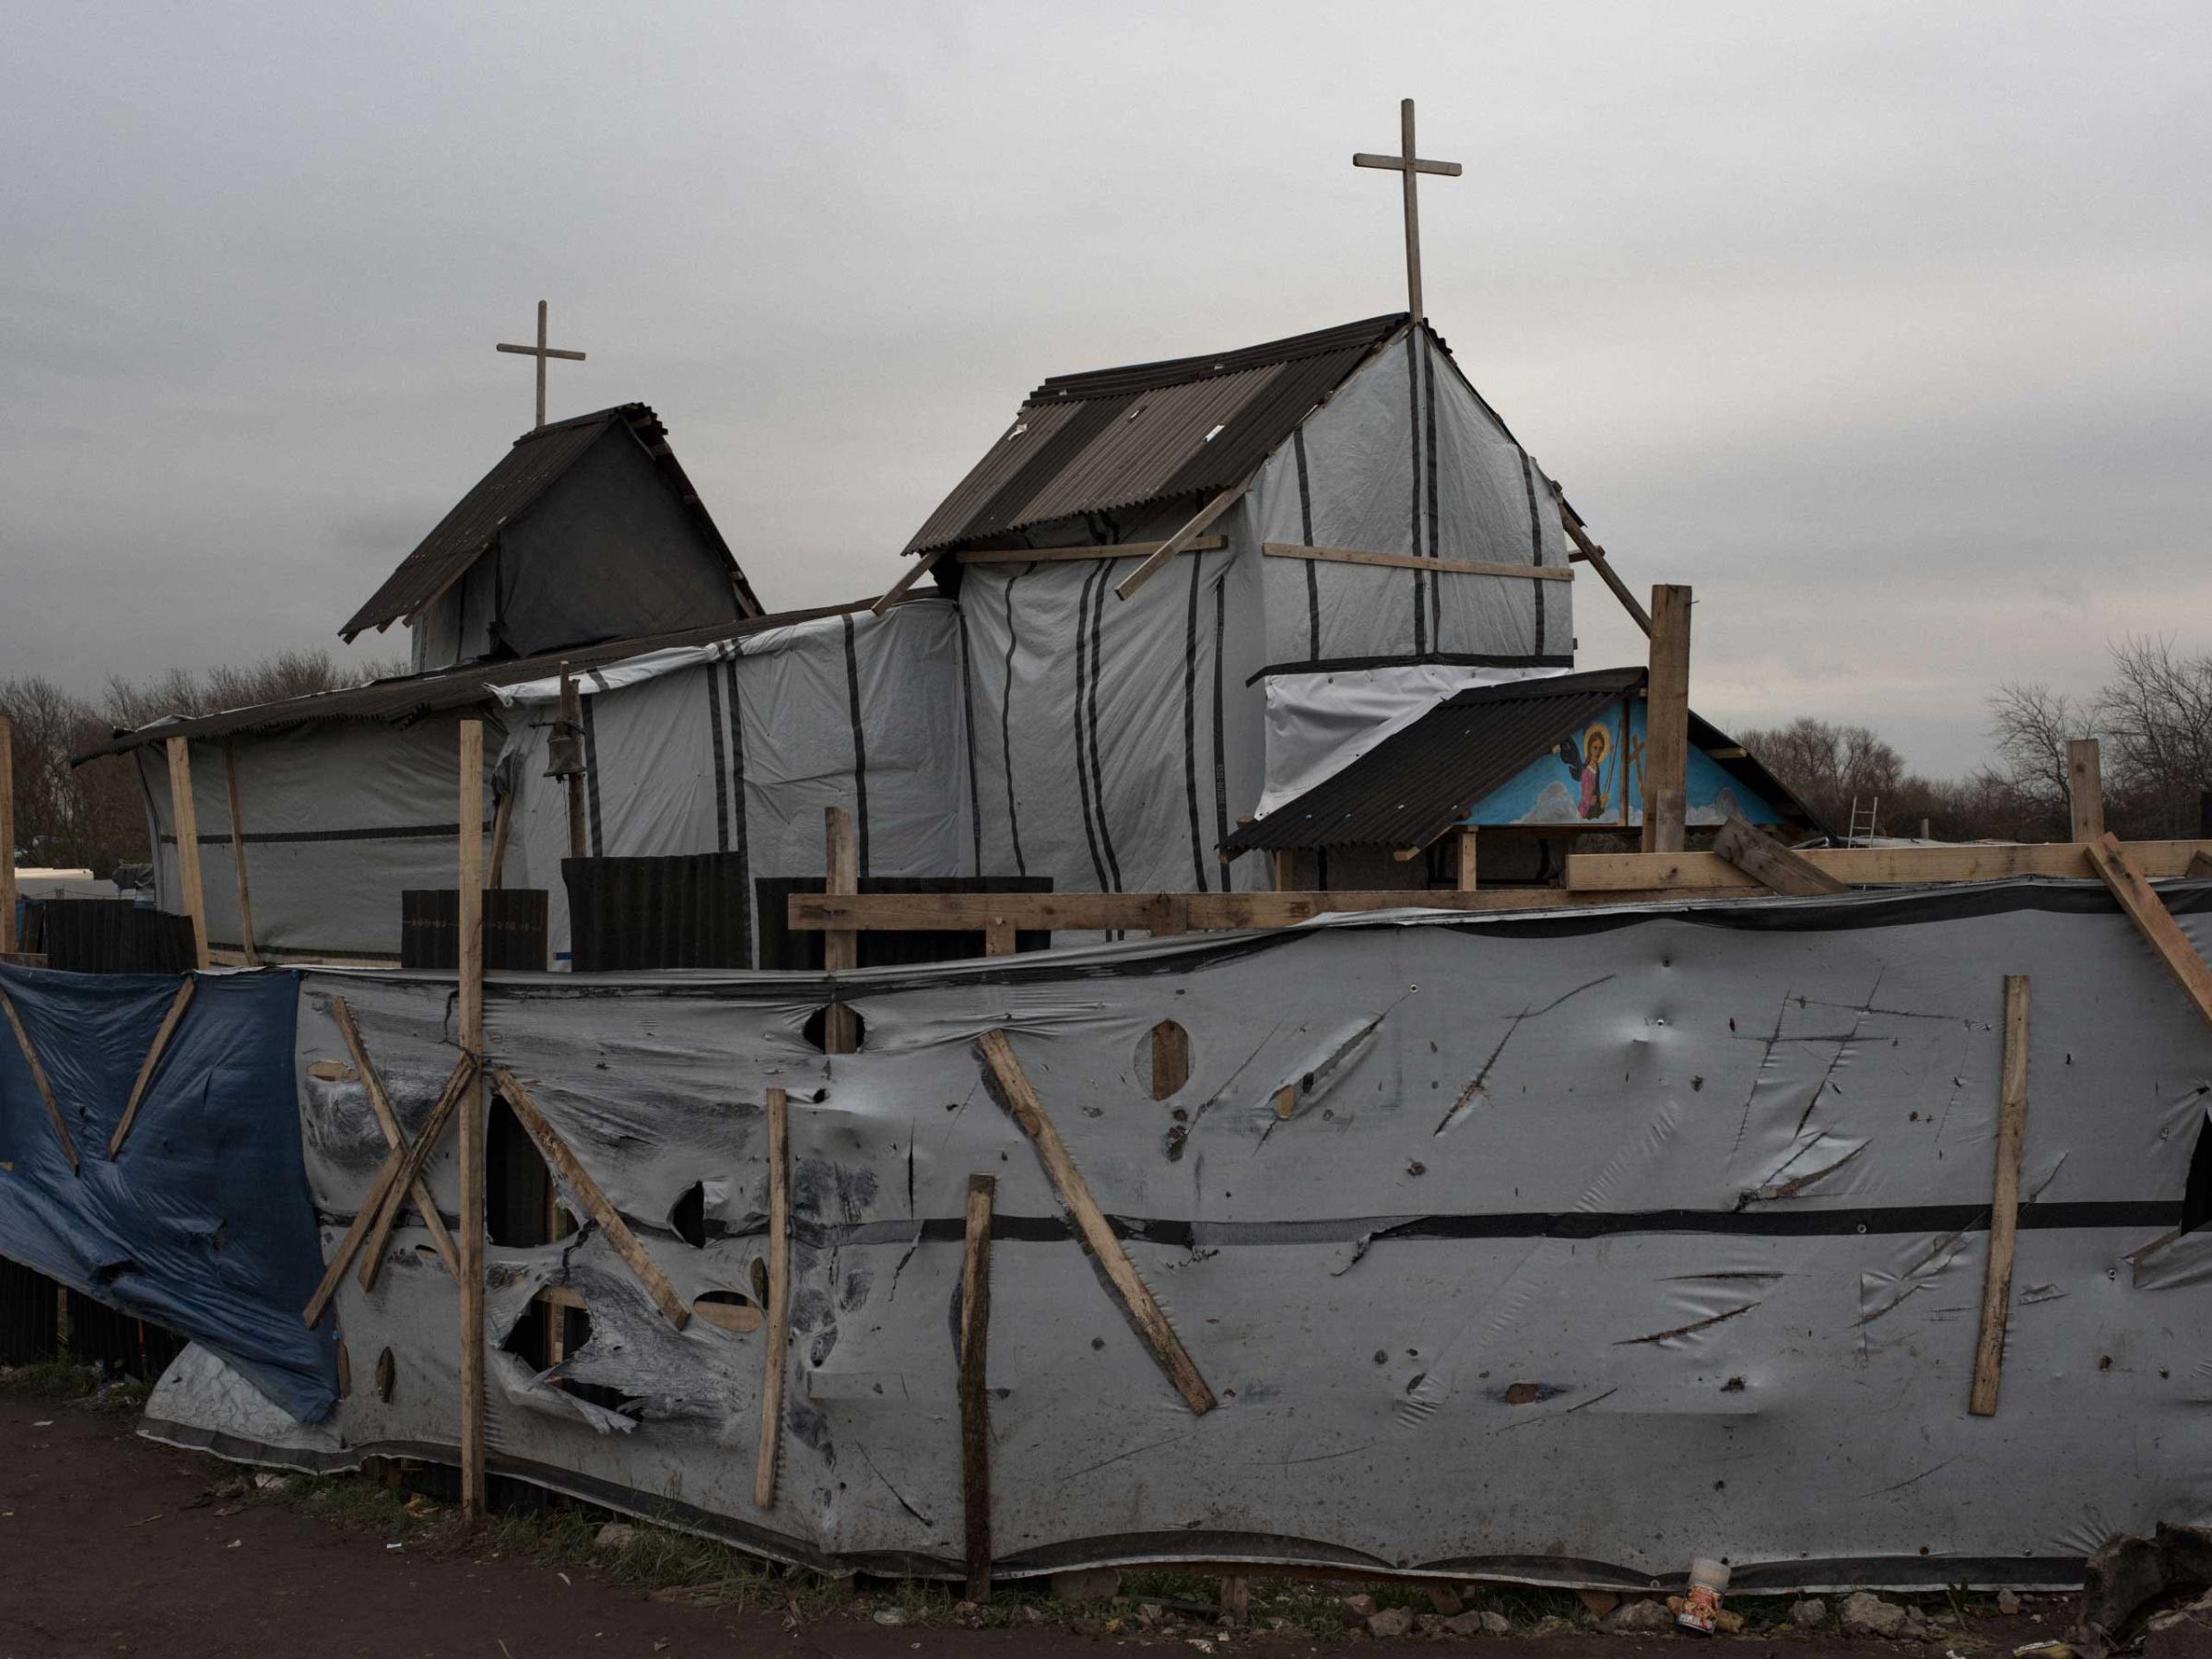 The makeshift church for the Ethiopian and Eritrean community is known as St. Michael's Calais in the "jungle" of Calais, France, Nov. 27, 2015.